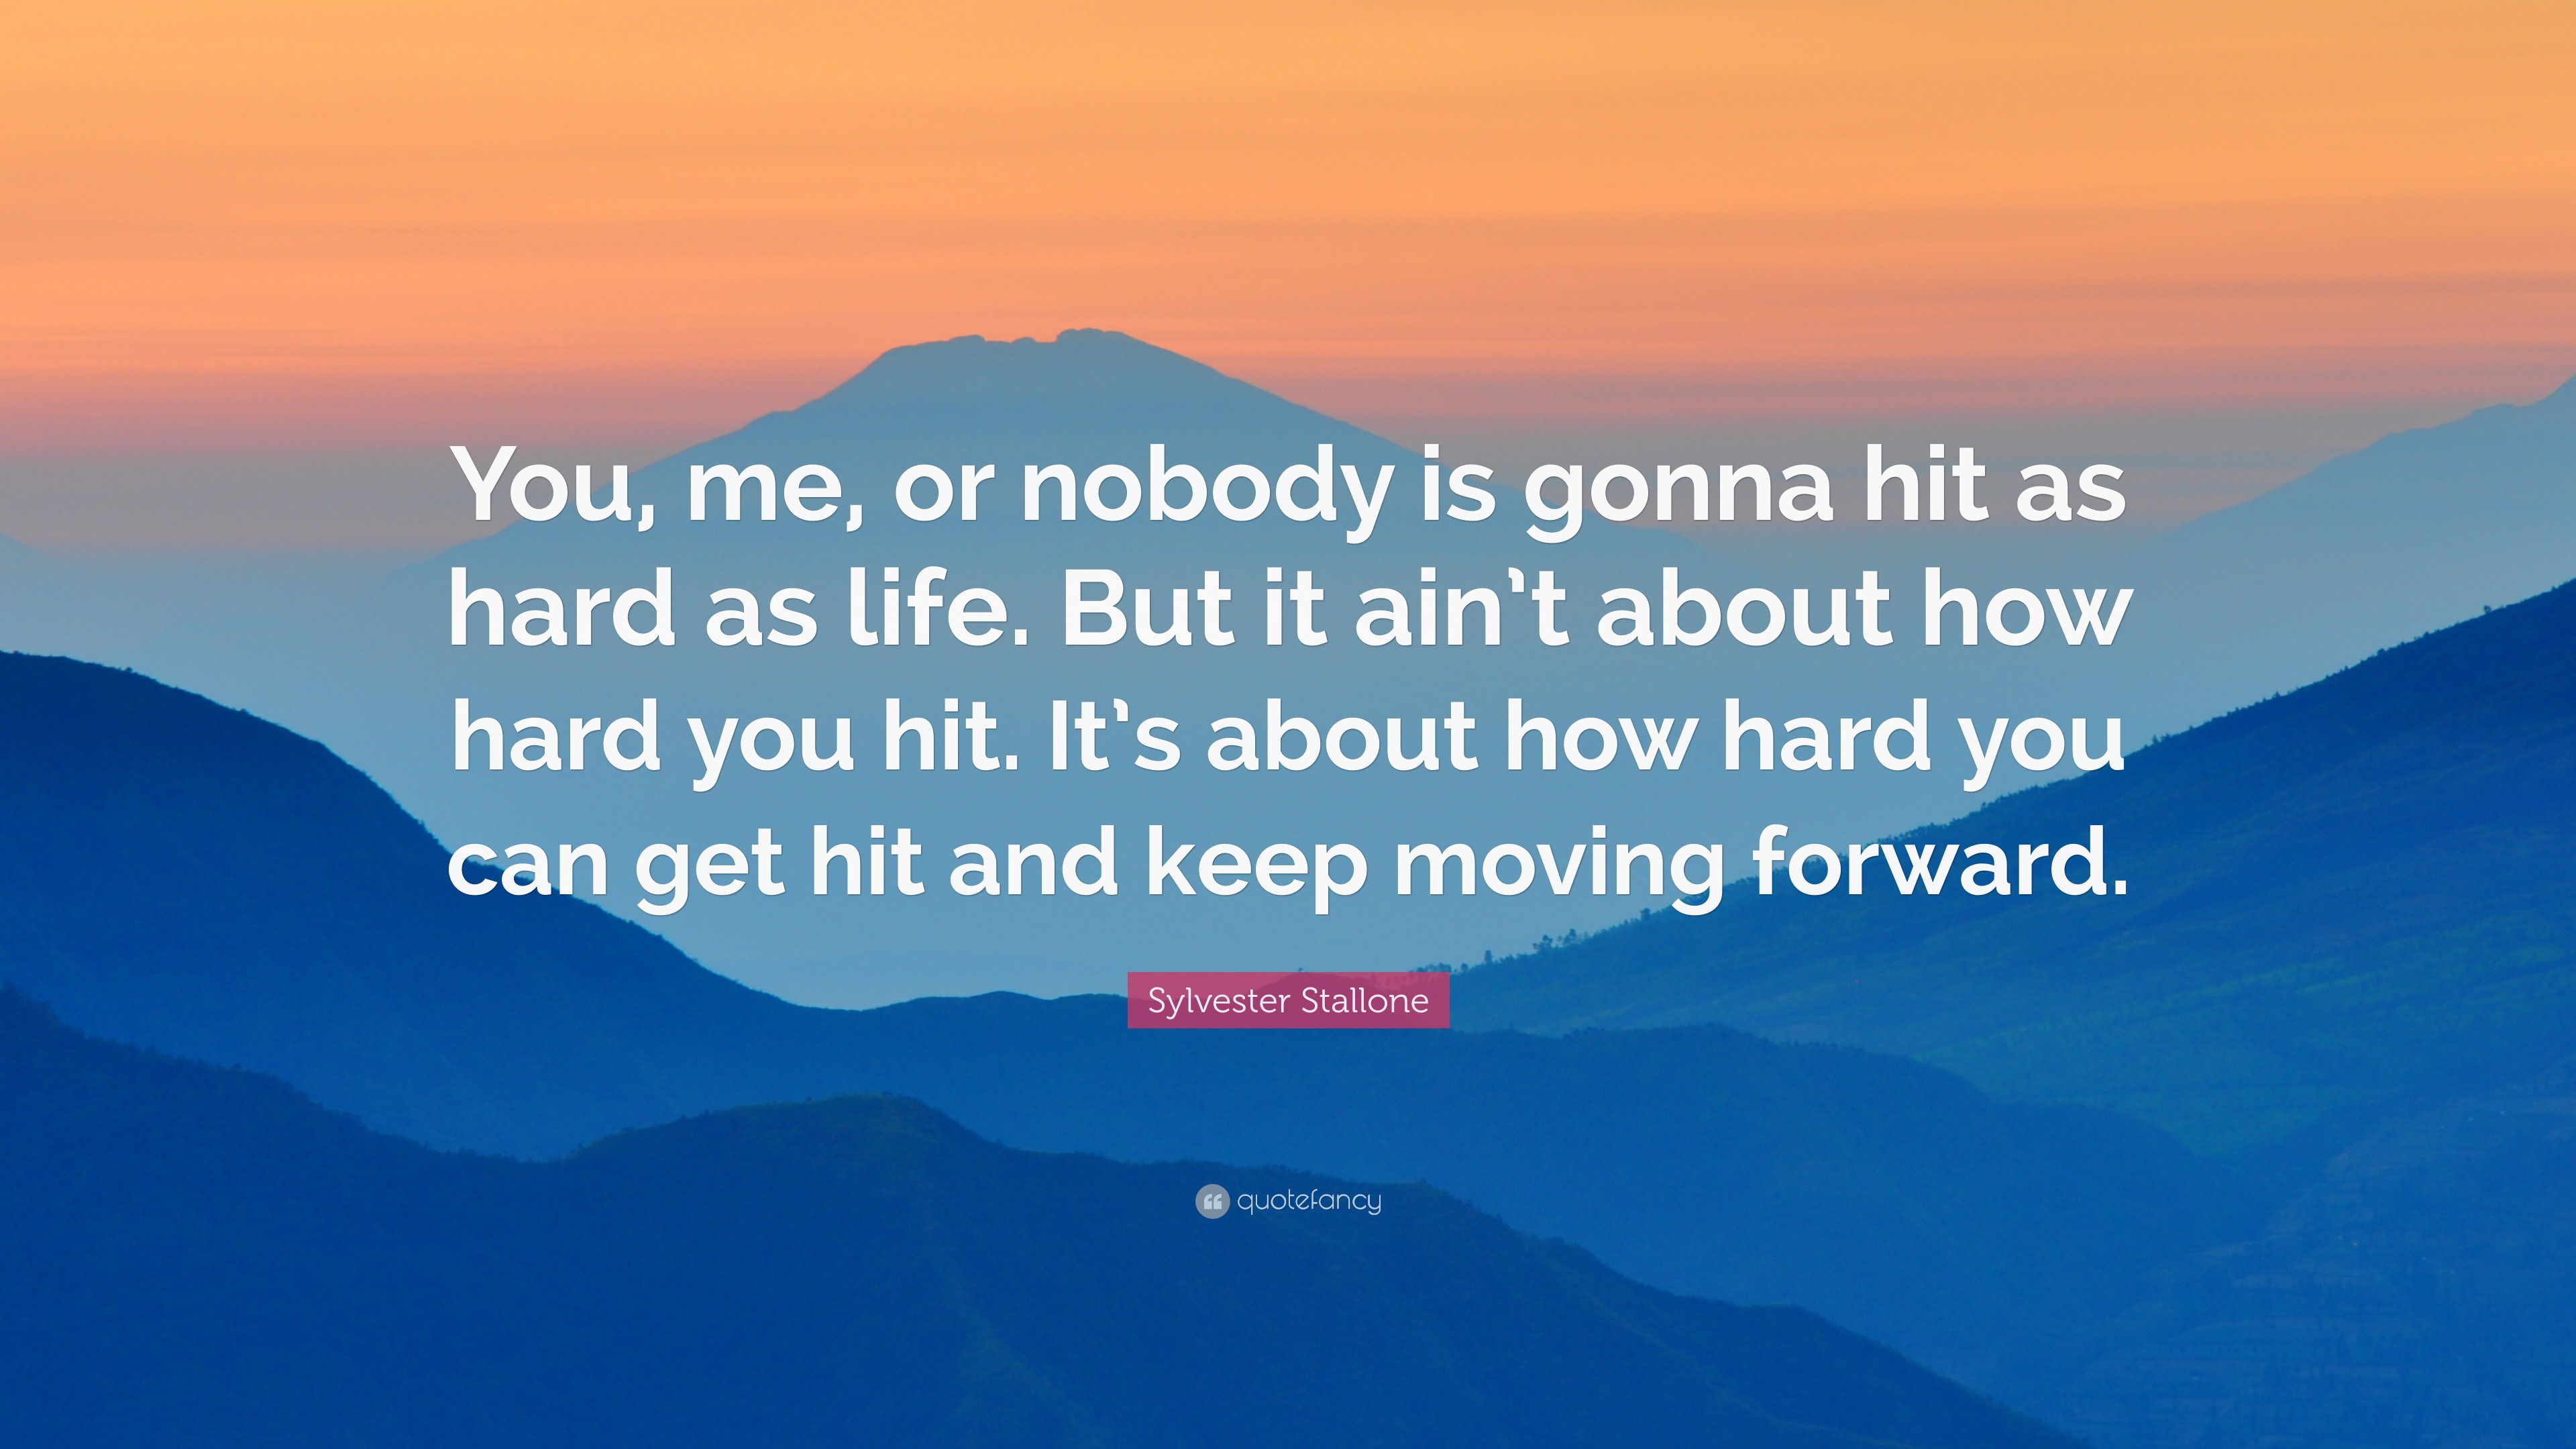 Sylvester Stallone Quote “you Me Or Nobody Is Gonna Hit As Hard As